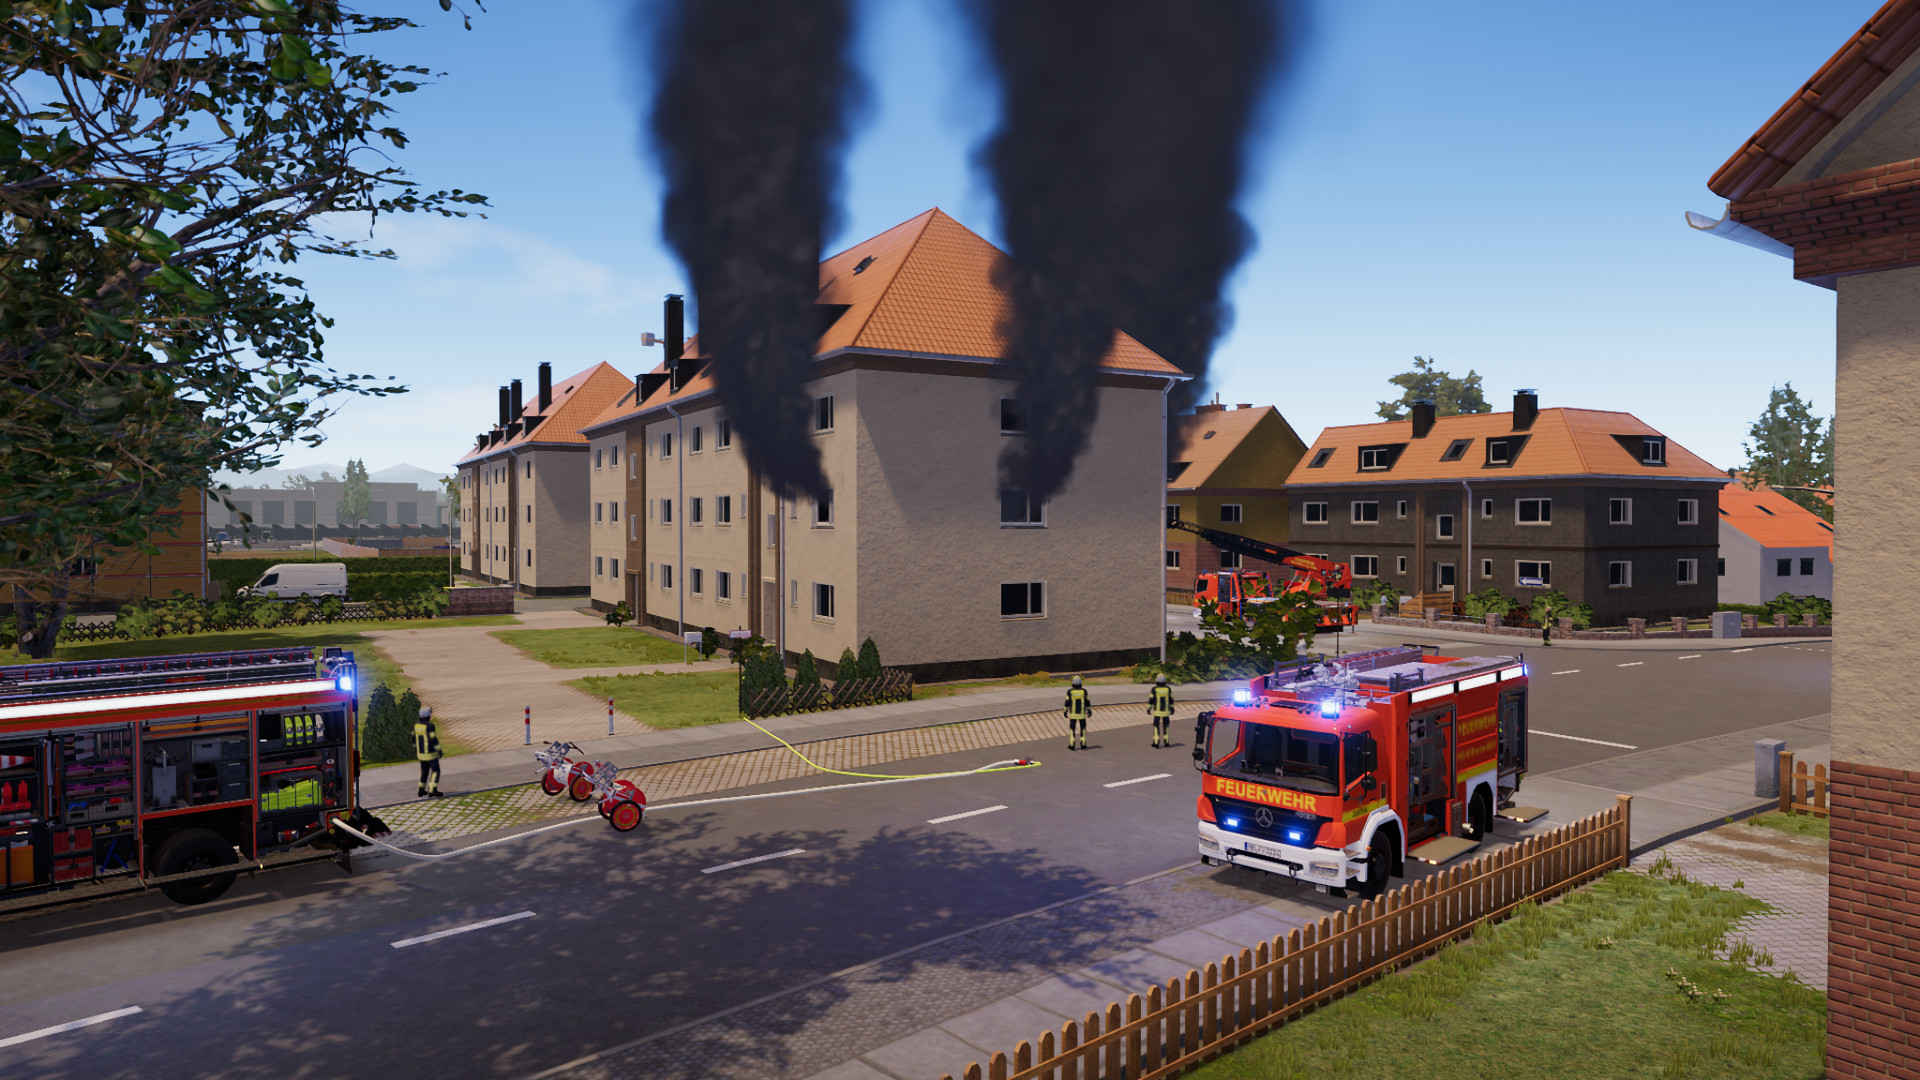 Emergency Call 112: The Fire Fighting Simulation 2 Steam CD Key